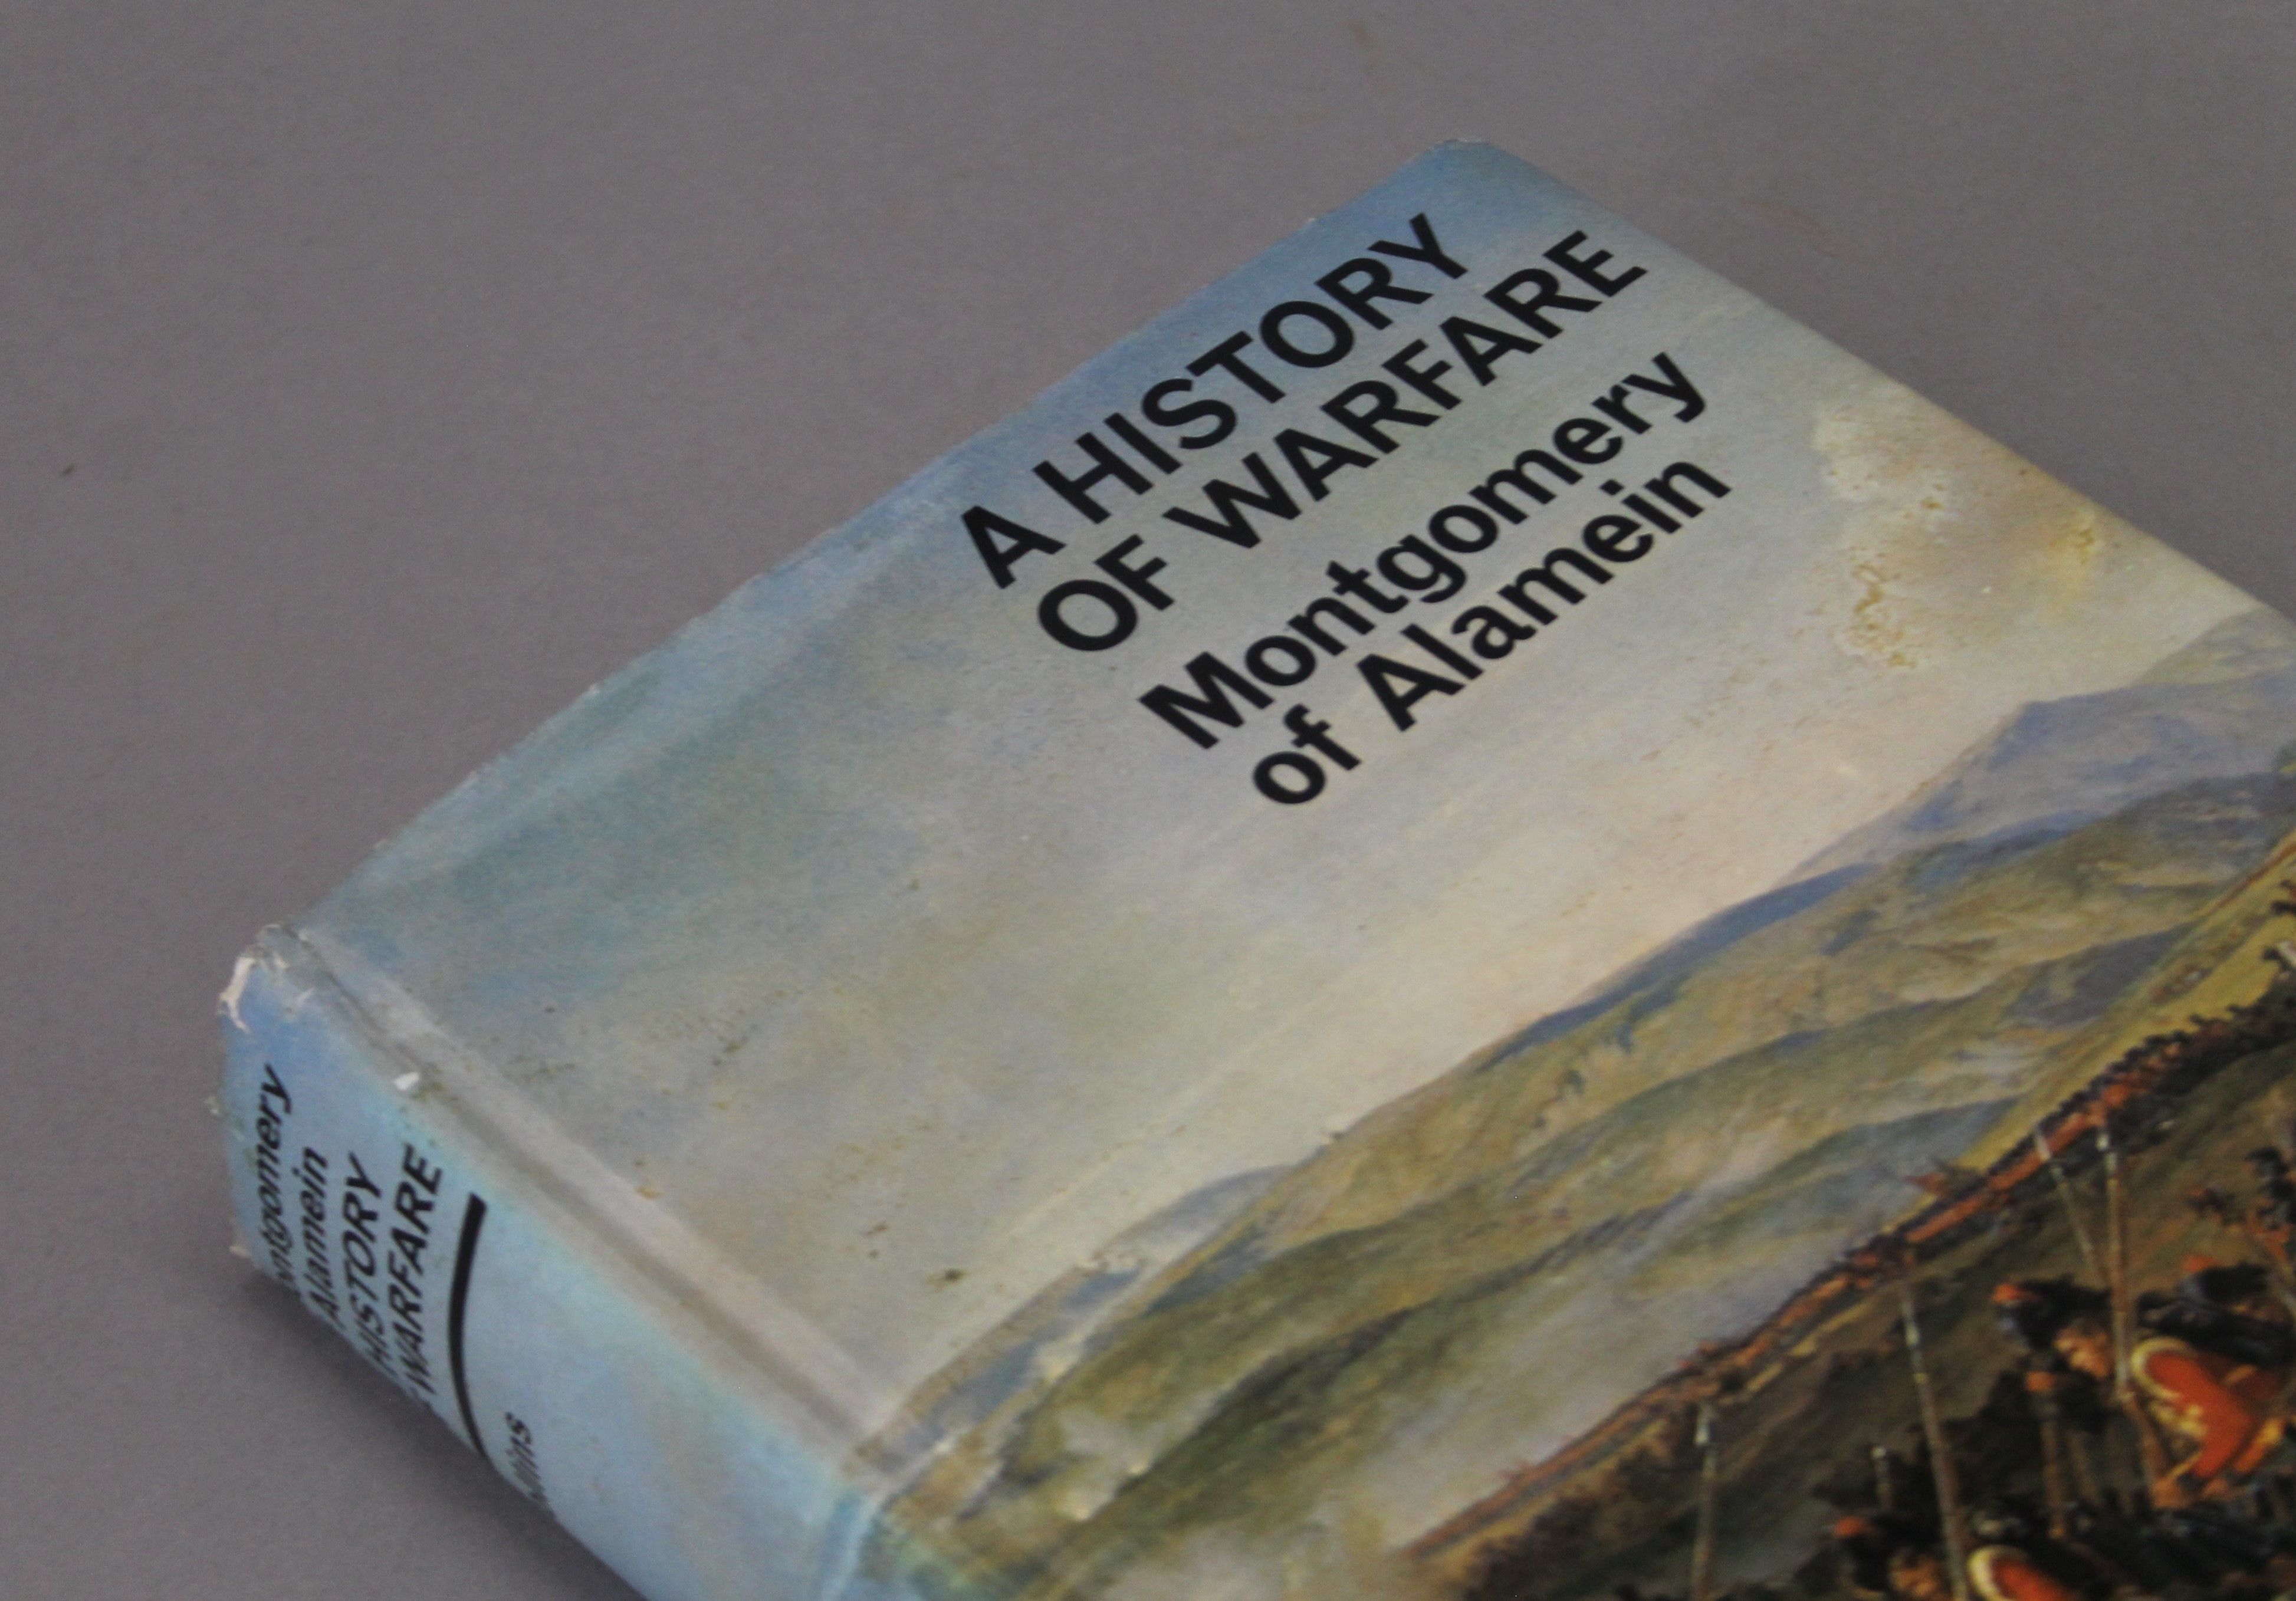 Montgomery (Field Marshall), A History of Warfare, first edition, - Image 4 of 11